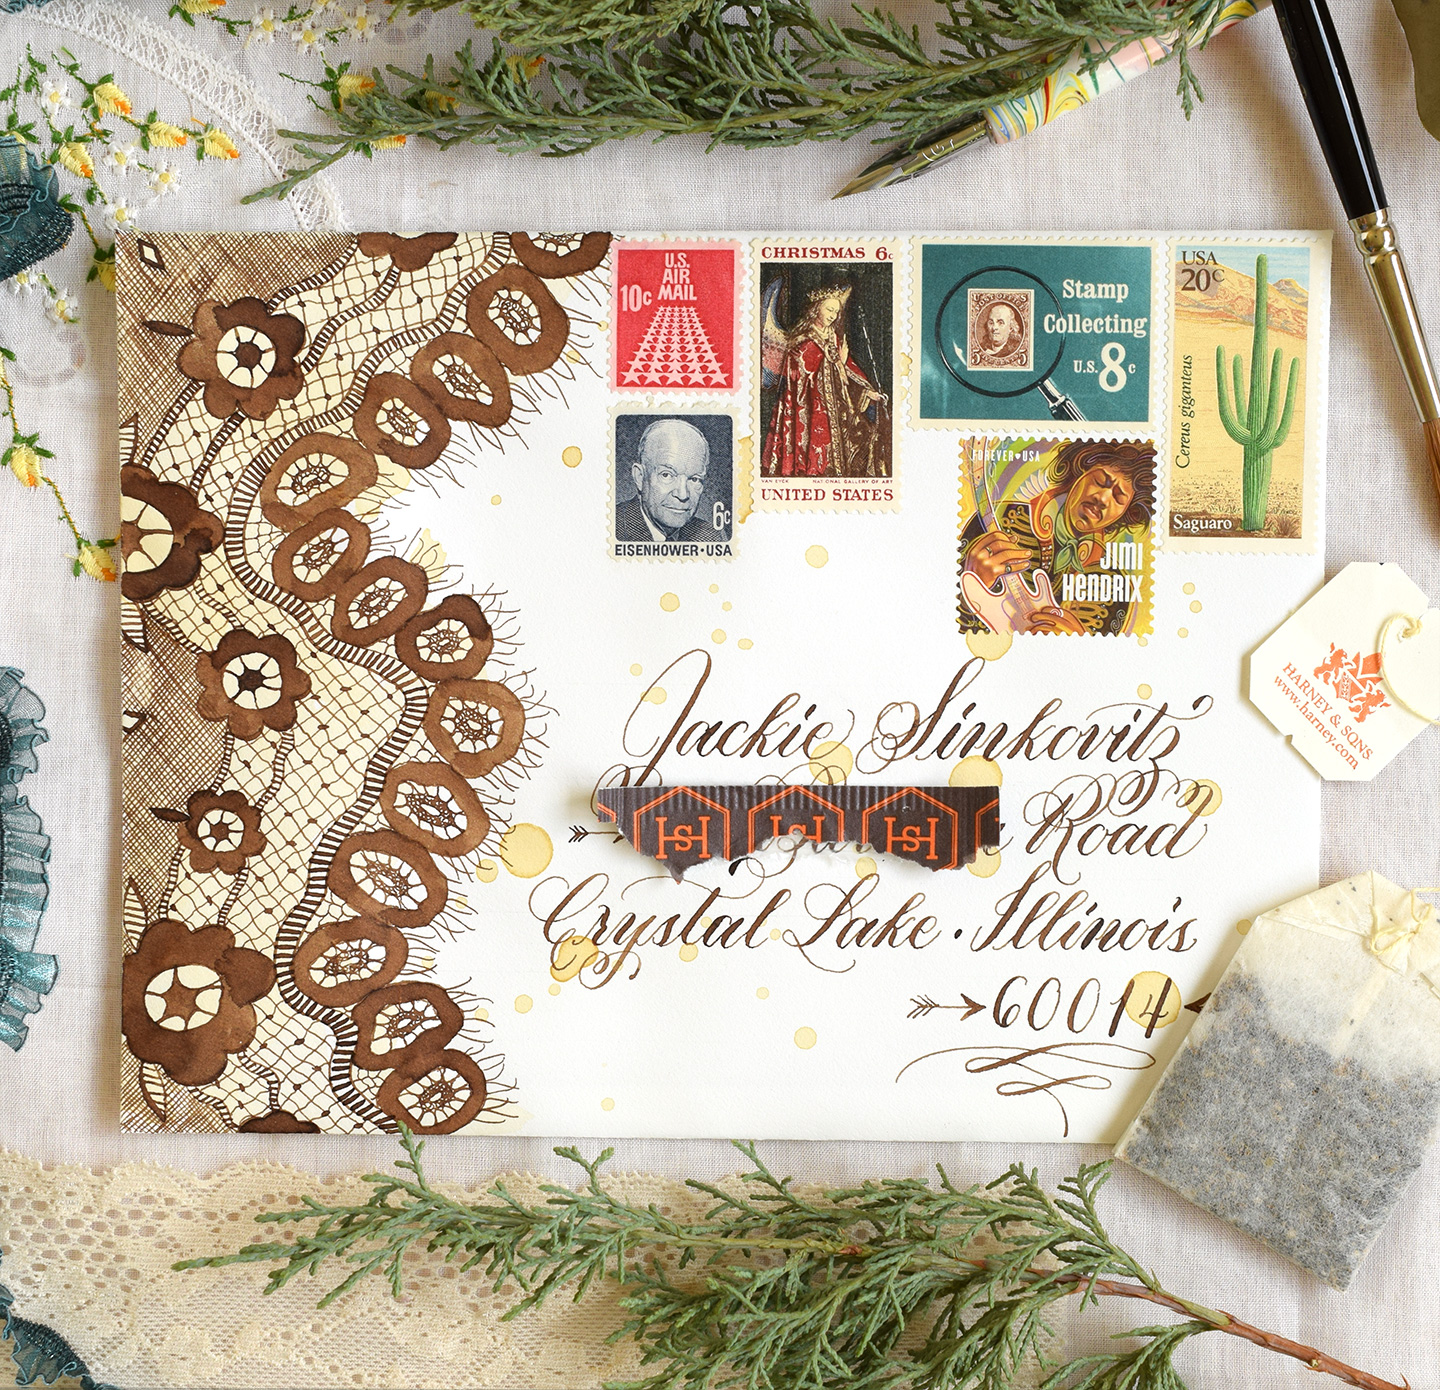 🪄 How to Create Snail Mail Magic With Artful Postage Stamp Collages